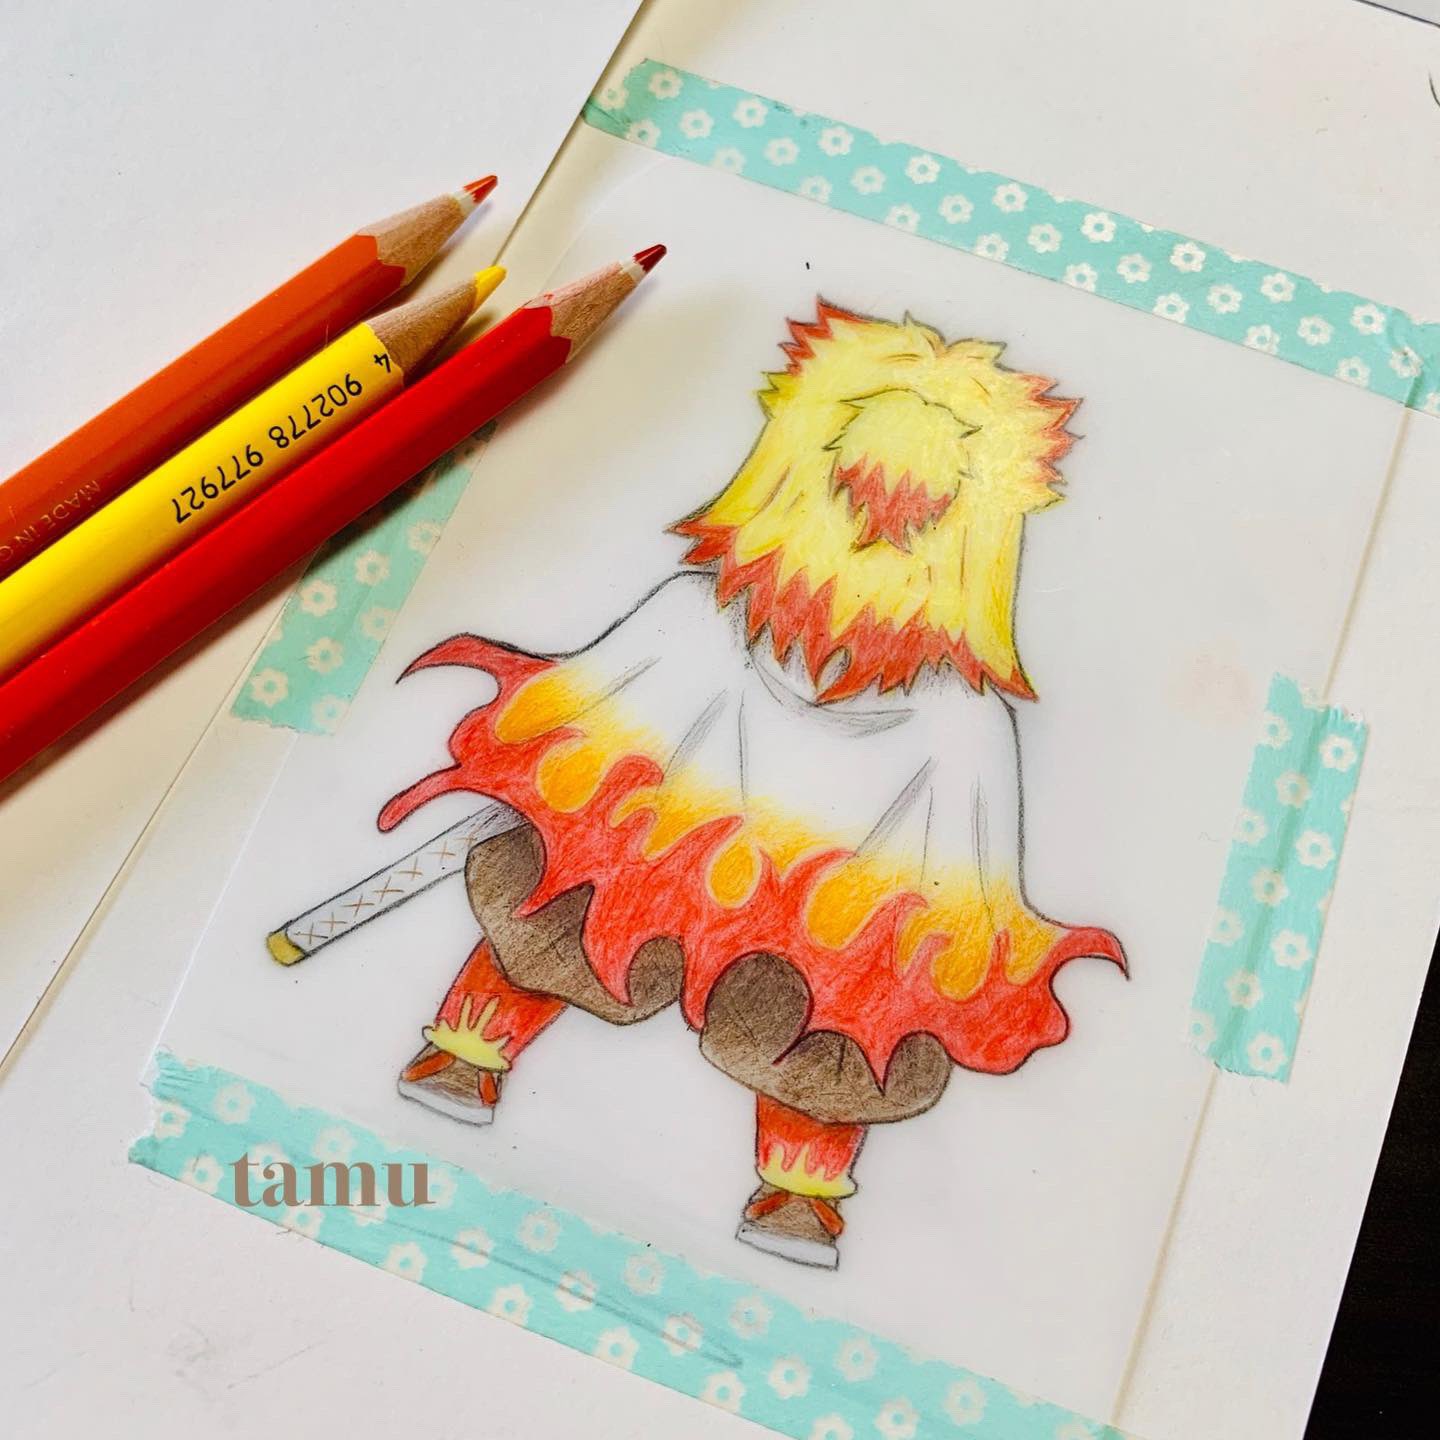 HOW TO DRAW FIRE with Copic Markers 